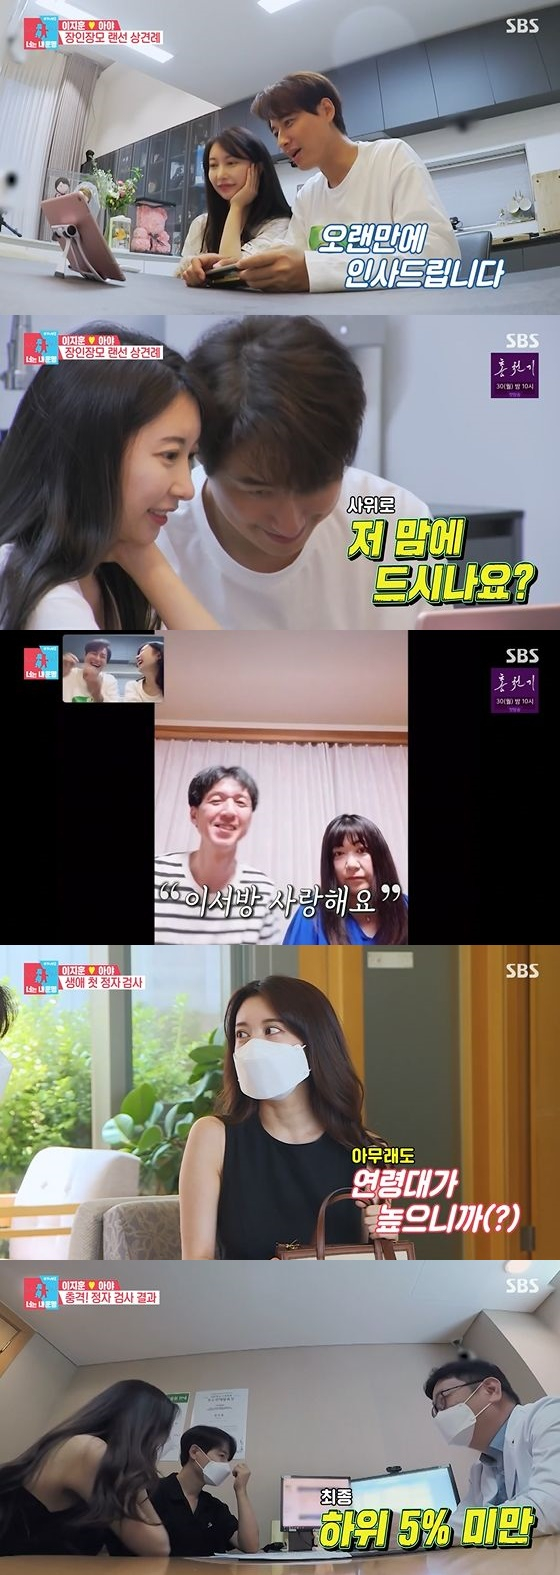 SBS entertainment Same Bed, Different Dreams 2: You Are My Dest - You Are My Destiny broadcast on the afternoon of the 16th, contains the honeymoon routine of the Sei Ashina Lee Ji-hoon couple.Lee Ji-hoon gave a non-Contact meeting with his craftsman through a video call.Lee Ji-hoon regretted that he could not do it directly because of Corona City, but he actively prepared to learn Sei Ashina to say hello to Japanese.Beyond the screen, Sei Ashinas parents greeted their son-in-law in Korean, especially when they were surprised by the young parents.Lee Ji-hoon said, It is the sixth year with my mother-in-law, and I am one year old with my sister.Sei Ashinas father told Lee Ji-hoon that he had prepared to say, I love you in the West.Lee Ji-hoon said, Sei Ashinas mother watched a lot of dramas, so Korea thought everything was Seaworld.I knew that Seaworld in the drama was a family culture, and when it happened, I asked Sei Ashina to come to Japan. Lee Ji-hoons Chinese Pavilion test results were then released; Lee Ji-hoon said: Sei Ashina completed prenatal testing first.It was my turn to be tested for the second generation plan. Sei Ashina said, Chinese pavilion is better than sheep, but Lee Ji-hoons many ages were worried.Lee Ji-hoon received shocking results that the number of Chinese pavilions and motility were within the normal range, but the shape of Chinese pavilion was less than the bottom 5%.Lee Ji-hoon asked the second generation plan, saying, Sei Ashina first wanted only two daughters, but now she has left it open.On the other hand, Ha Jae-sook jun-haeng living in Goseong, Gangwon ProvinceThe couple also included their daily lives. These couples revealed their hobbies. My body is a rule that makes it easier for me to use.I am constantly exercising, he said.lee jun-haengThe silver showed upcycling knack for recycling the trash brought during a beach walk. lee jun-haengI uploaded his work to a used transaction app, and said that the car was sold through the app.Ha Jae-sook attracted attention by gradation anger to her husband who did not keep her promise to ban used transactions.